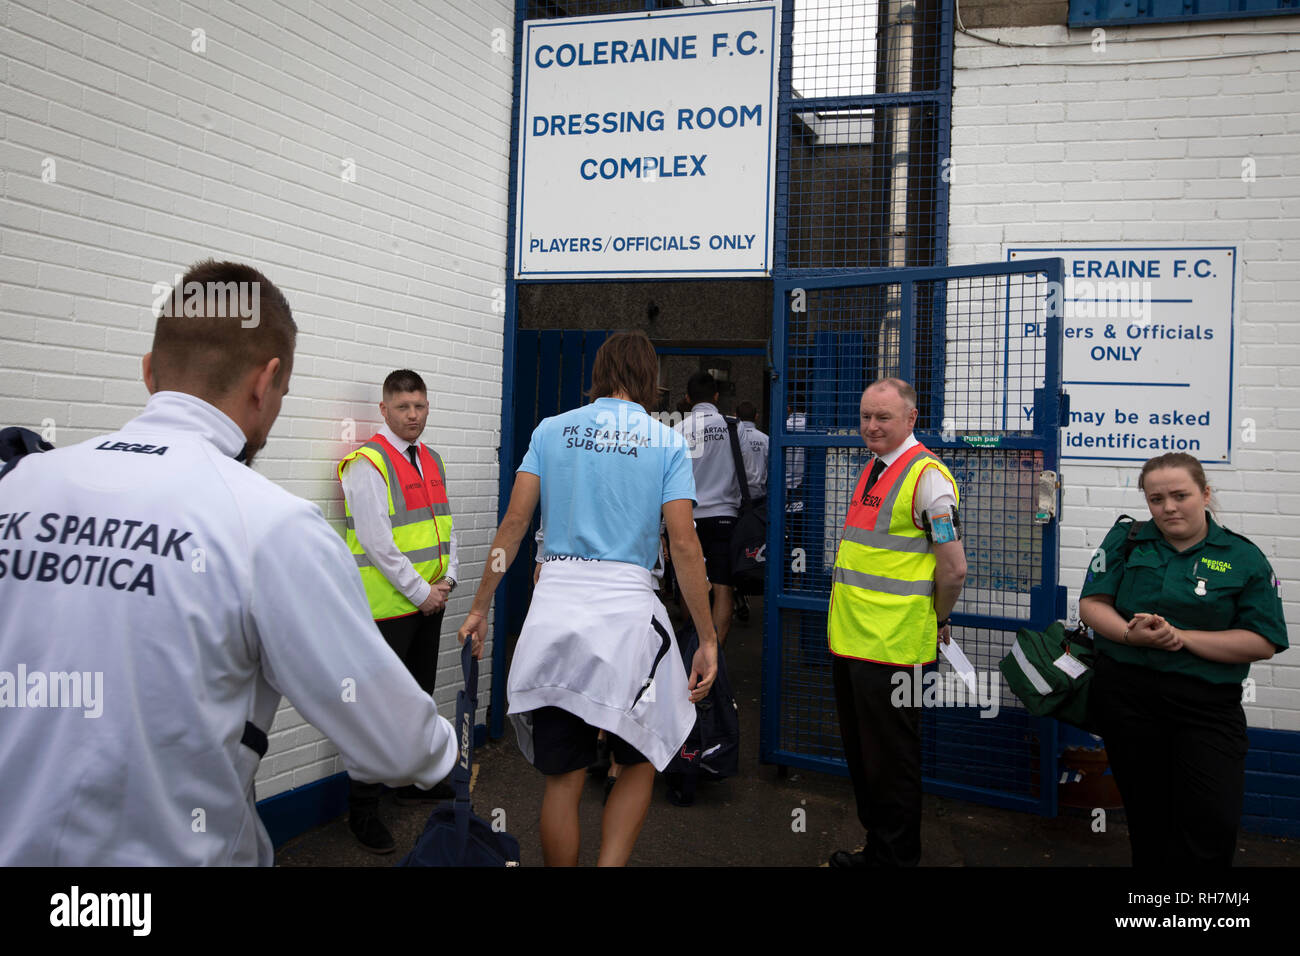 Visiting team players arriving at the ground before Coleraine played Spartak Subotica of Serbia in a Europa League Qualifying First Round second leg at the Showgrounds, Coleraine. The hosts from Northern Ireland had drawn the away leg 1-1 the previous week, however, the visitors won the return leg 2-0 to progress to face Sparta Prague in the next round, watched by a sell-out crowd of 1700. Stock Photo